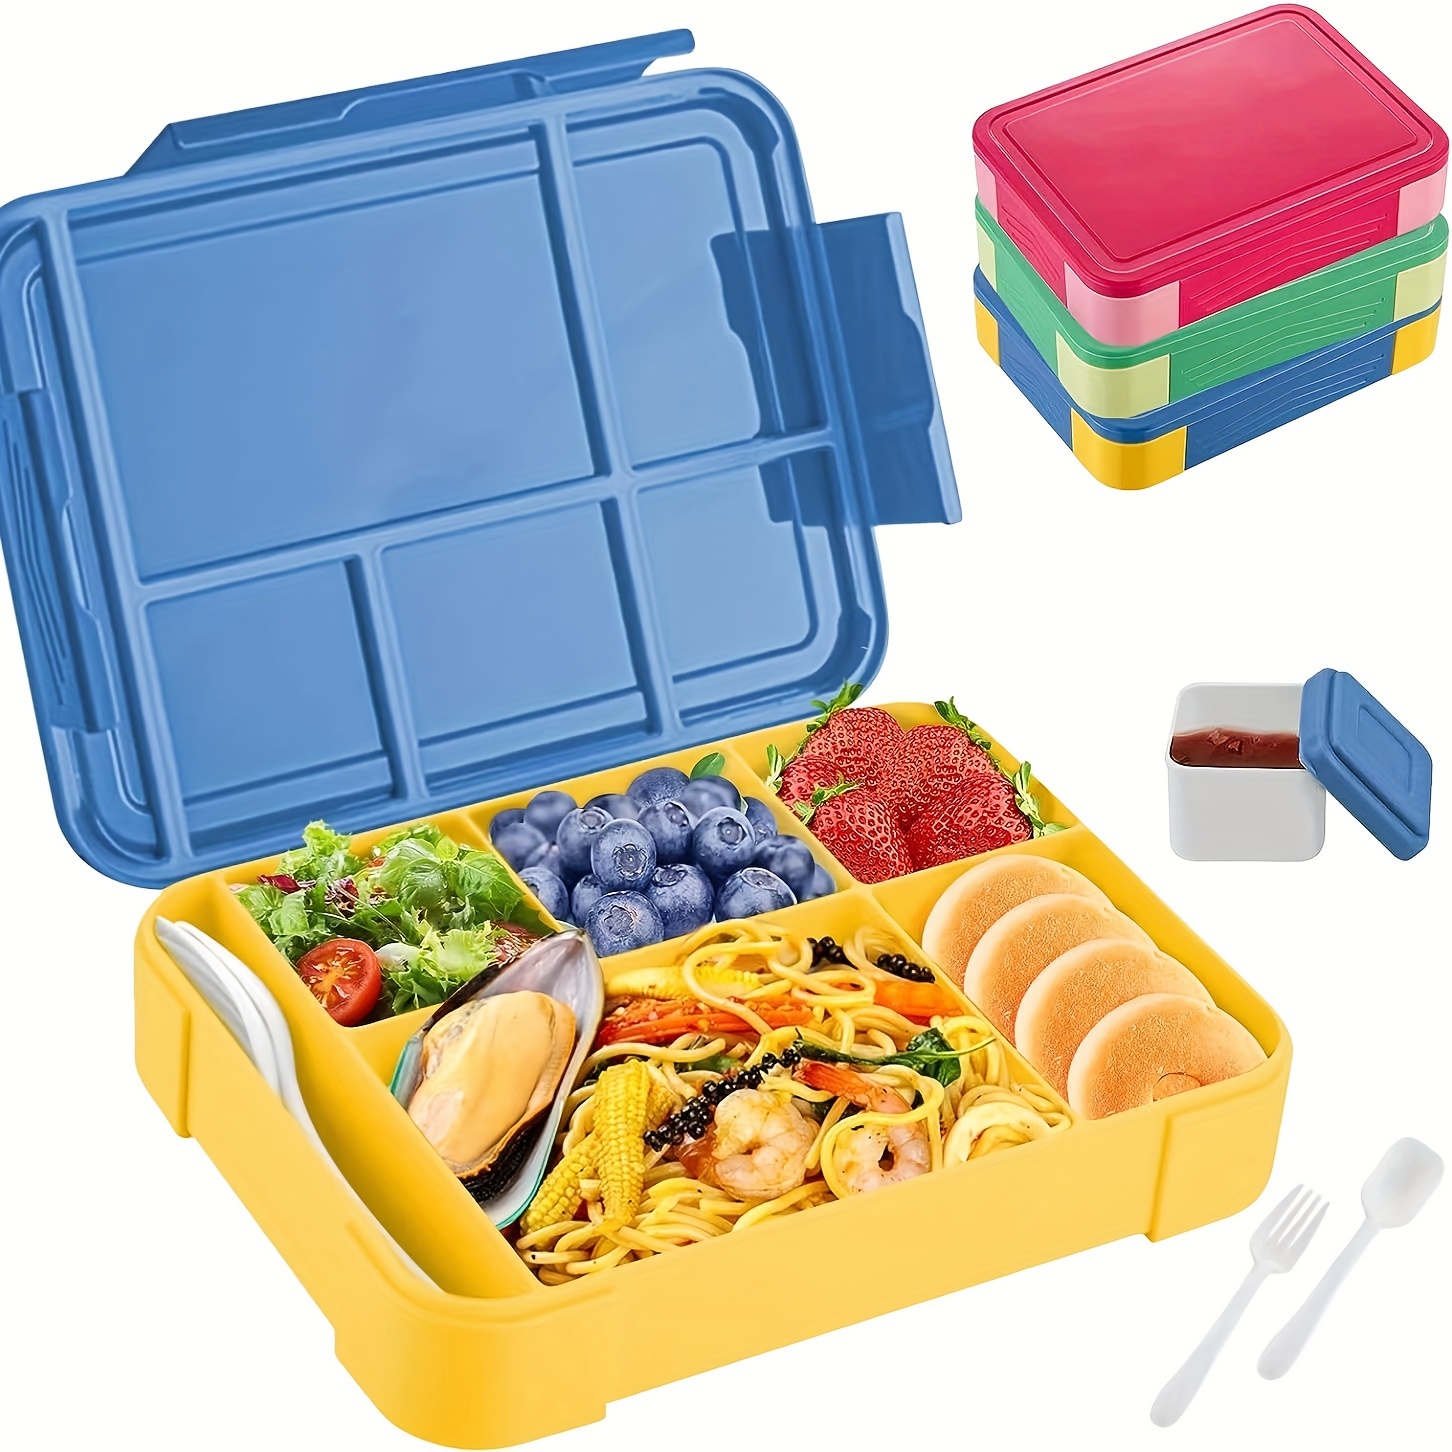 Bento Box Salad Lunch Box Split Seal Fruit Box With 5 Compartments Bento Tray Microwave Lunch Box With Reusable Spoon And Sauce Container